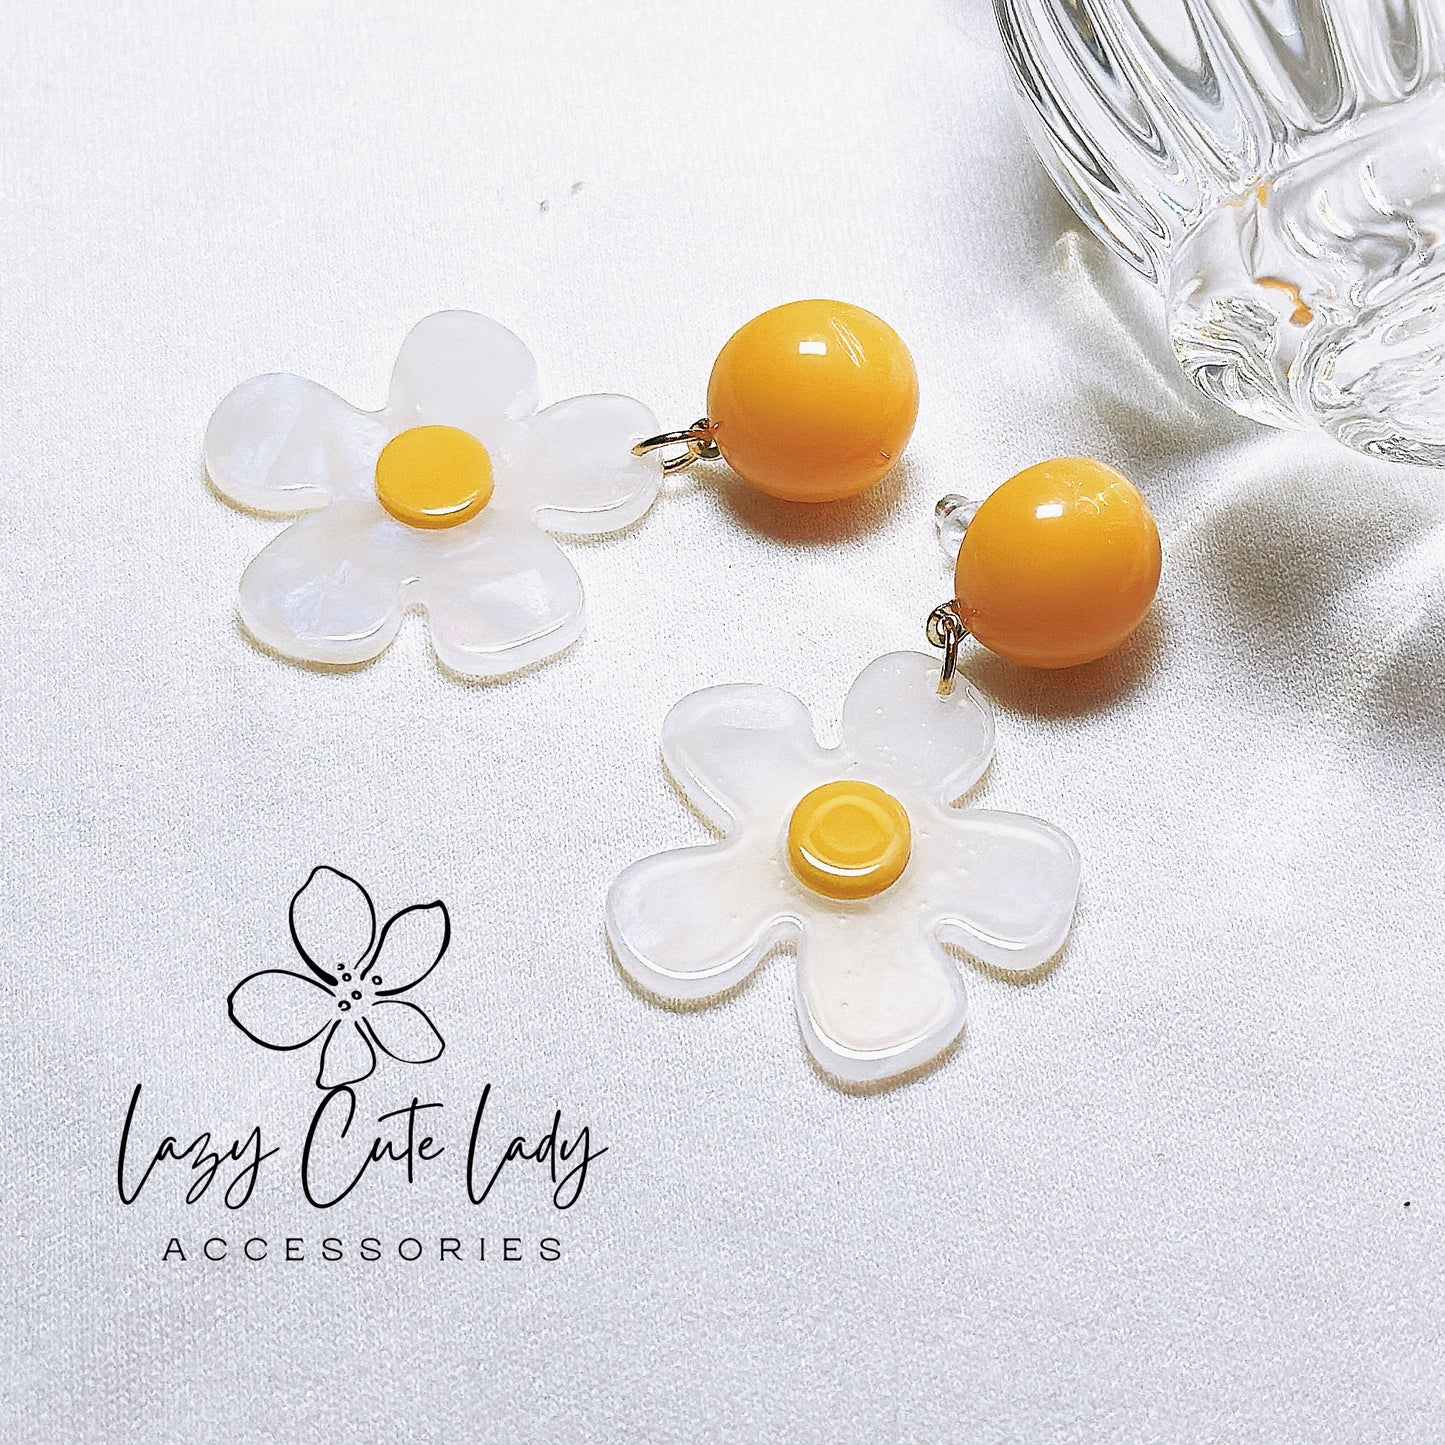 Vintage Blossom: Handcrafted White and Yellow Floral Earrings